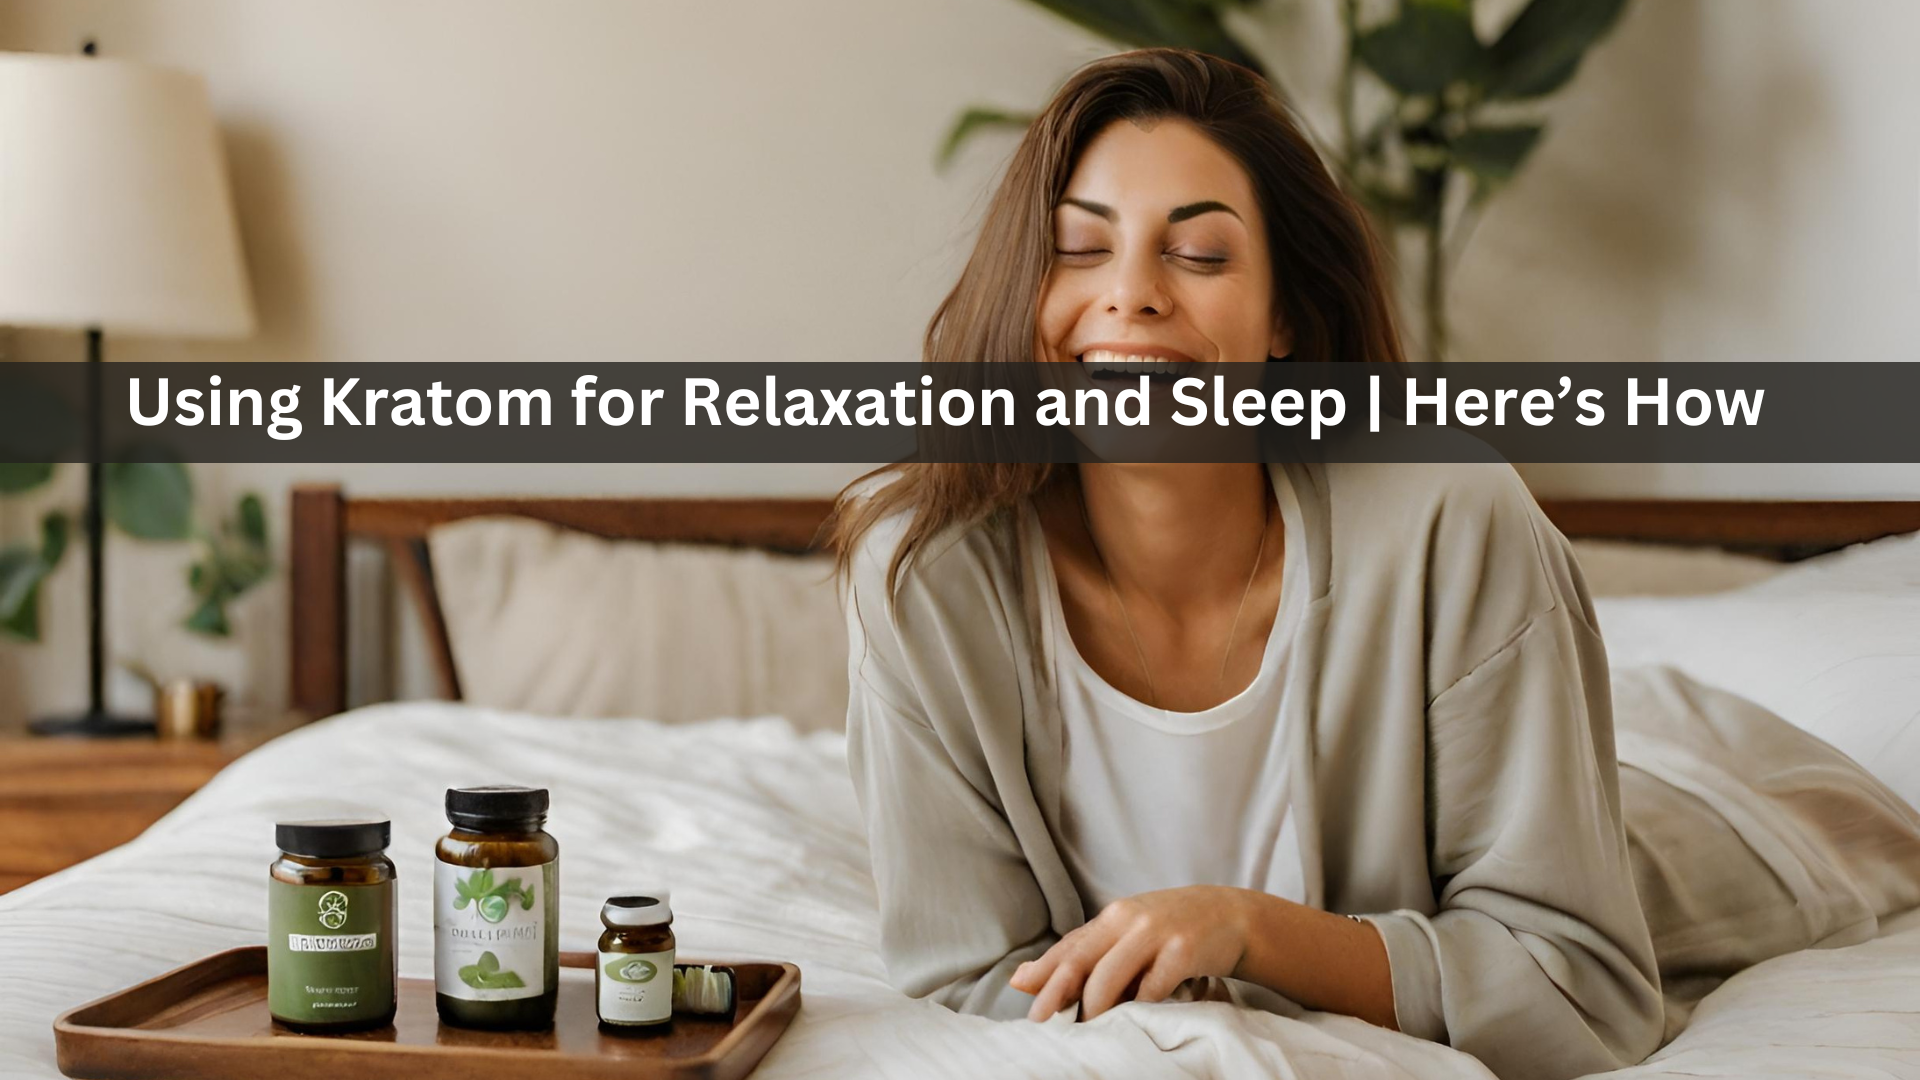 Using Kratom for Relaxation and Sleep - Here’s How